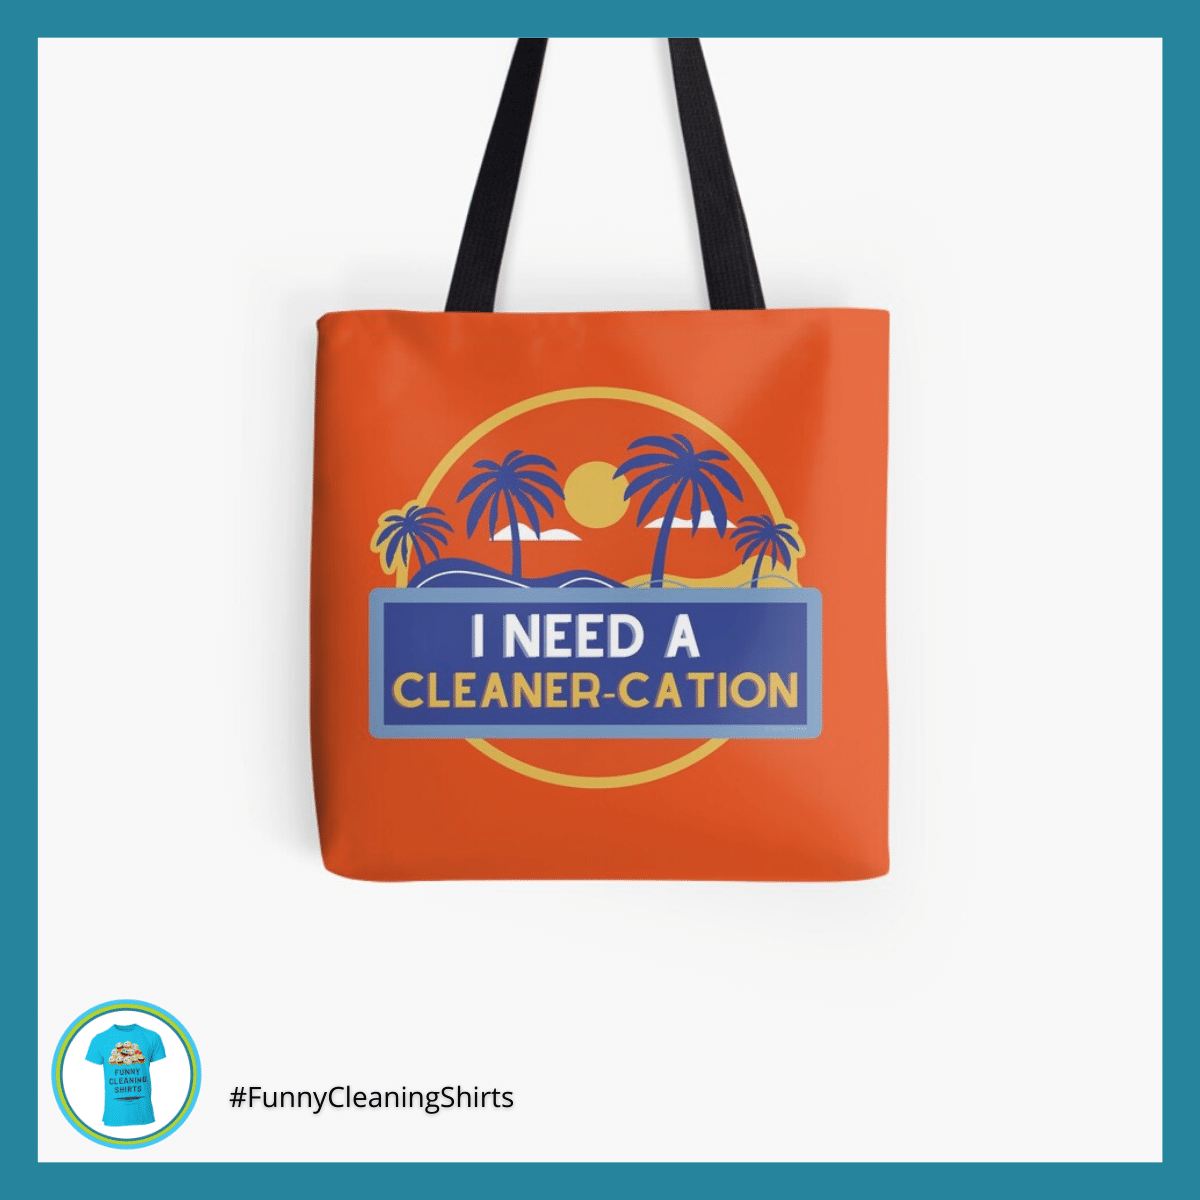 Cleaner-Cation Savvy Cleaner Funny Cleaning Shirts Tote